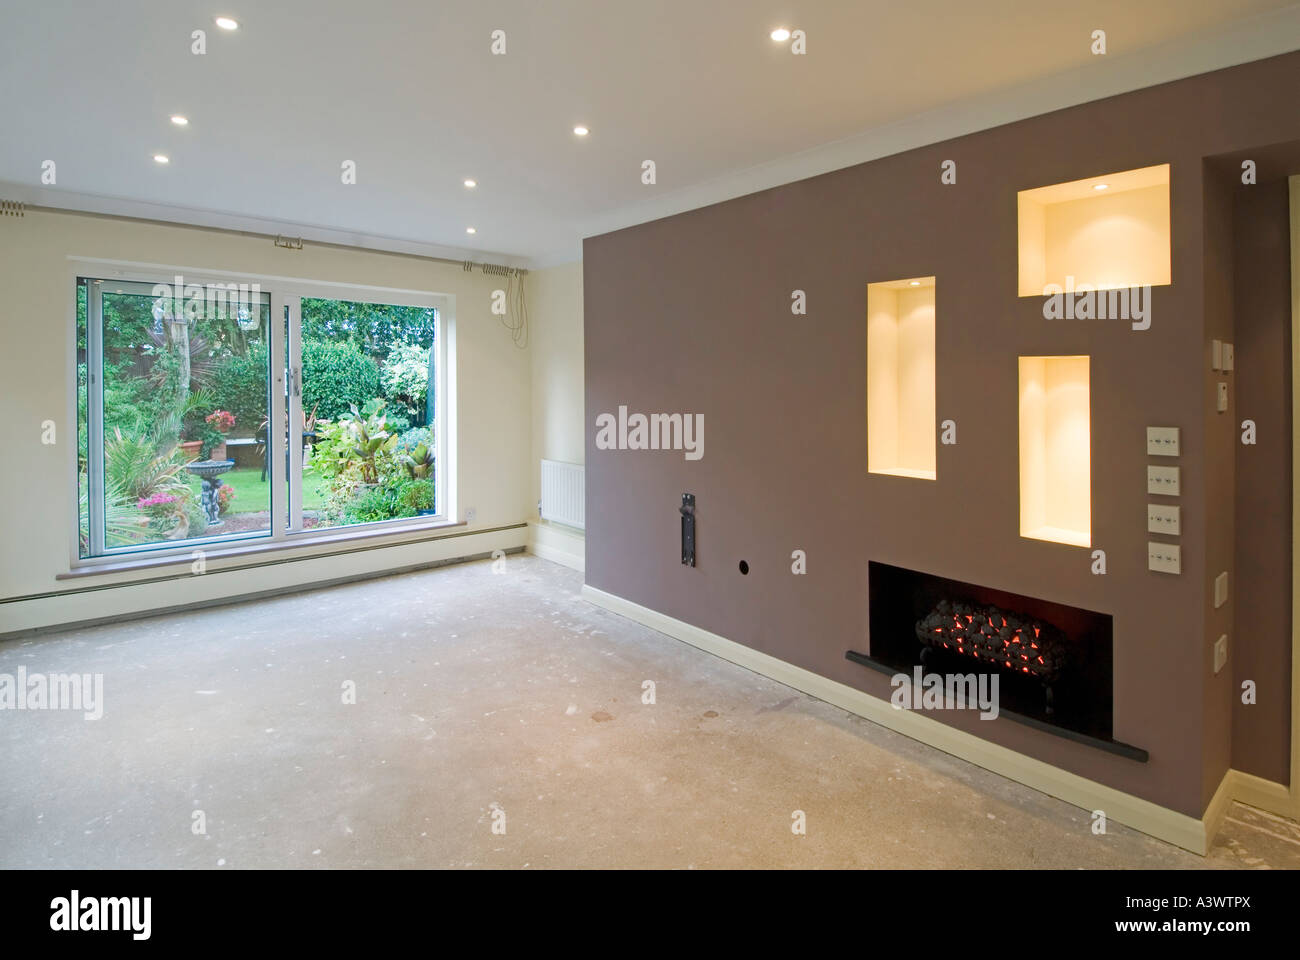 Home improvement makeover work to lounge living room interior new lighting testing wall alterations decorated awaiting carpet fitter Essex England UK Stock Photo